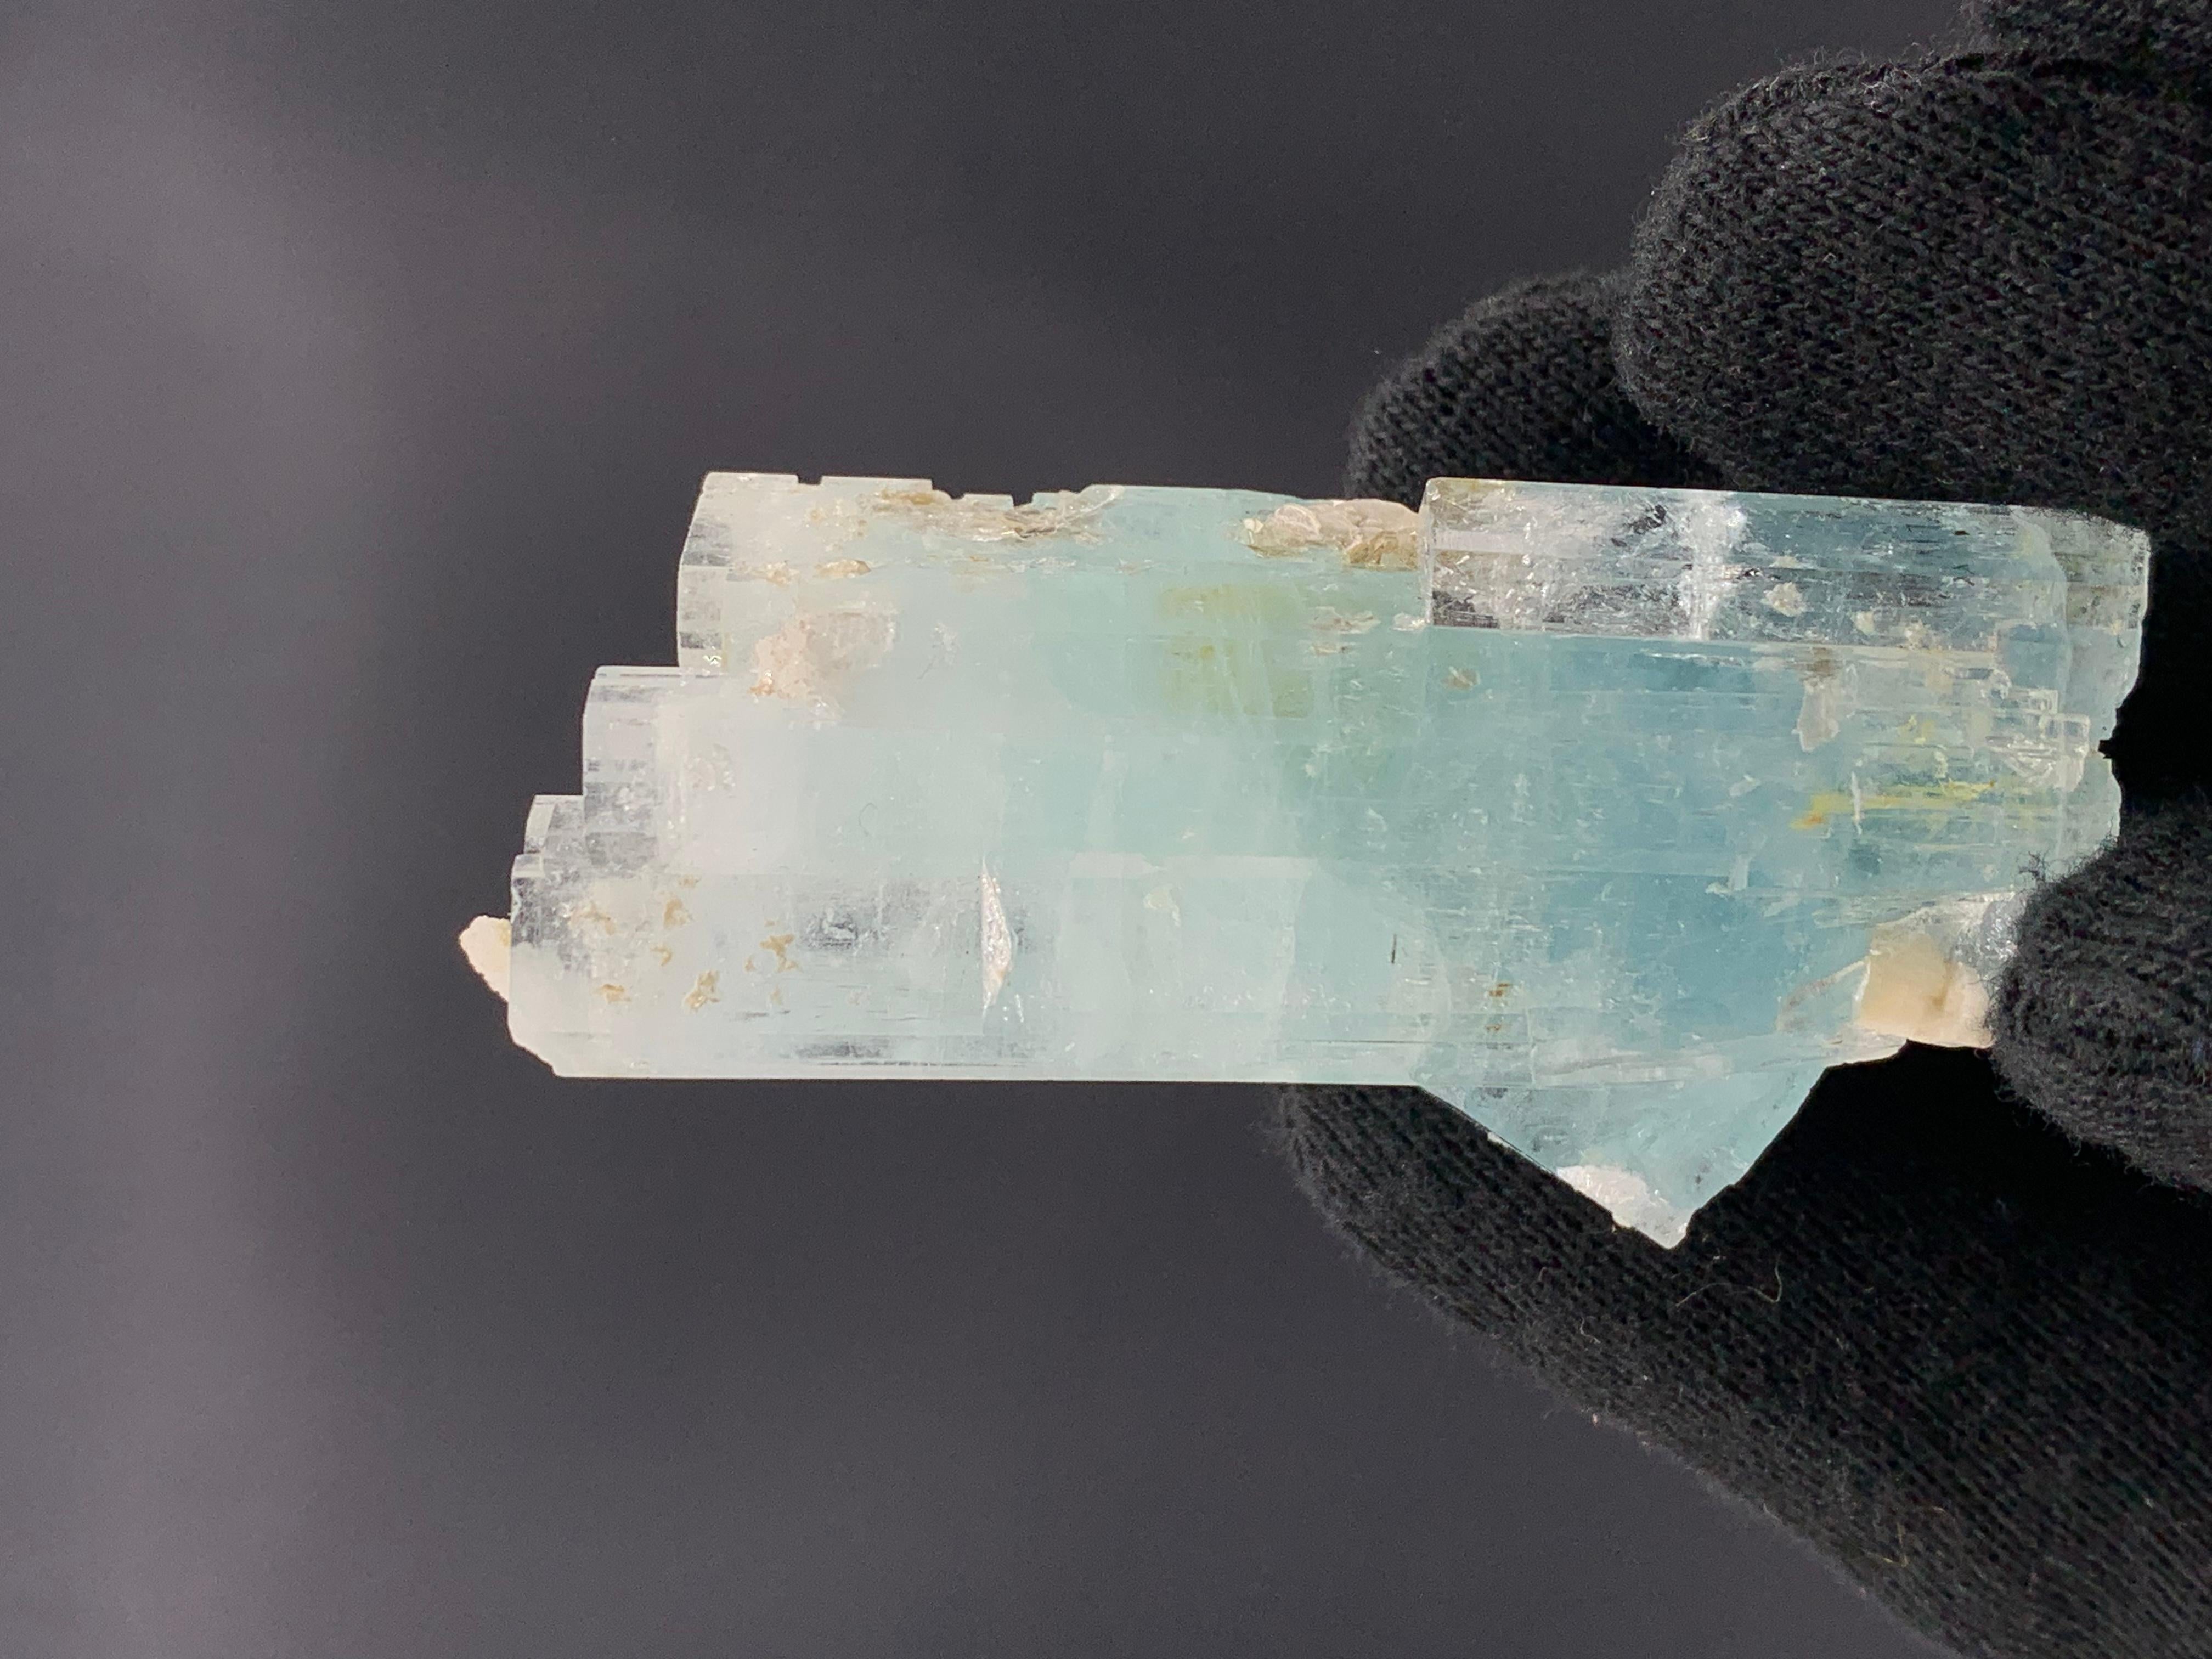 Lovely Aquamarine Crystals From Shigar Valley, Pakistan 
Weight: 41.75 Gram  
Dimension : 5.1 x 3.1 x 1.7 Cm 
Origin: Shigar Valley, Gilgit Baltistan, Pakistan 

Aquamarine helps us to gain insight, truth, and wisdom. It can be used to help calm the